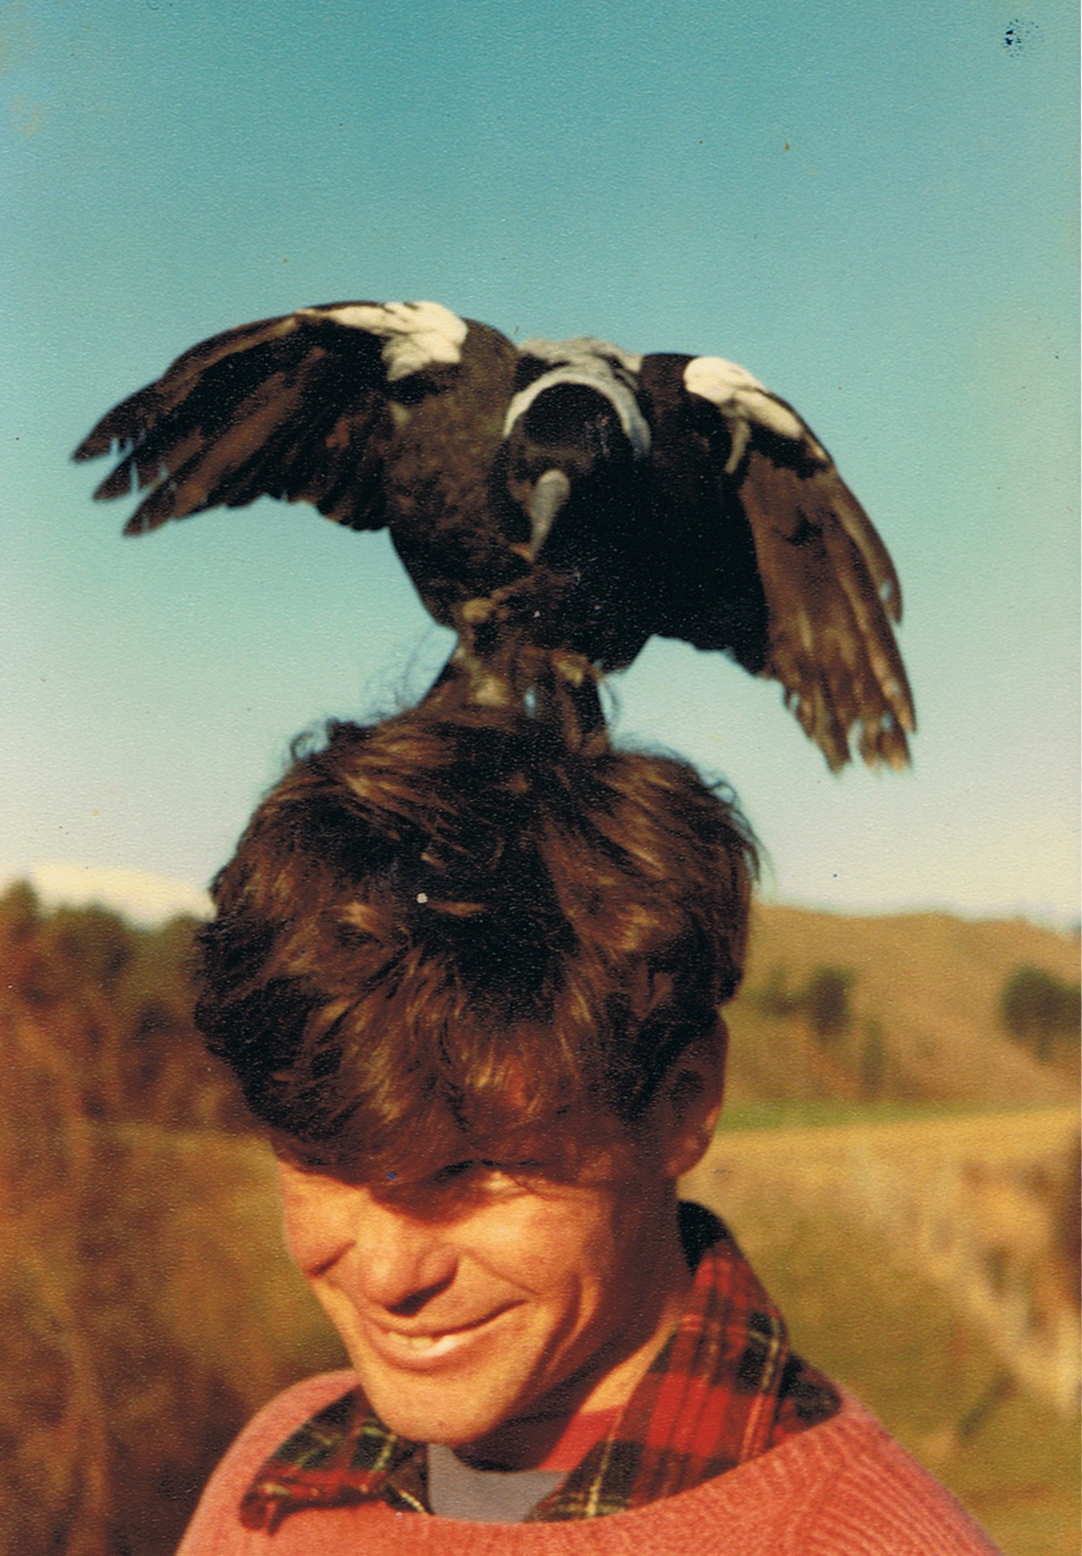 A photo of Gerard with a bird on his head